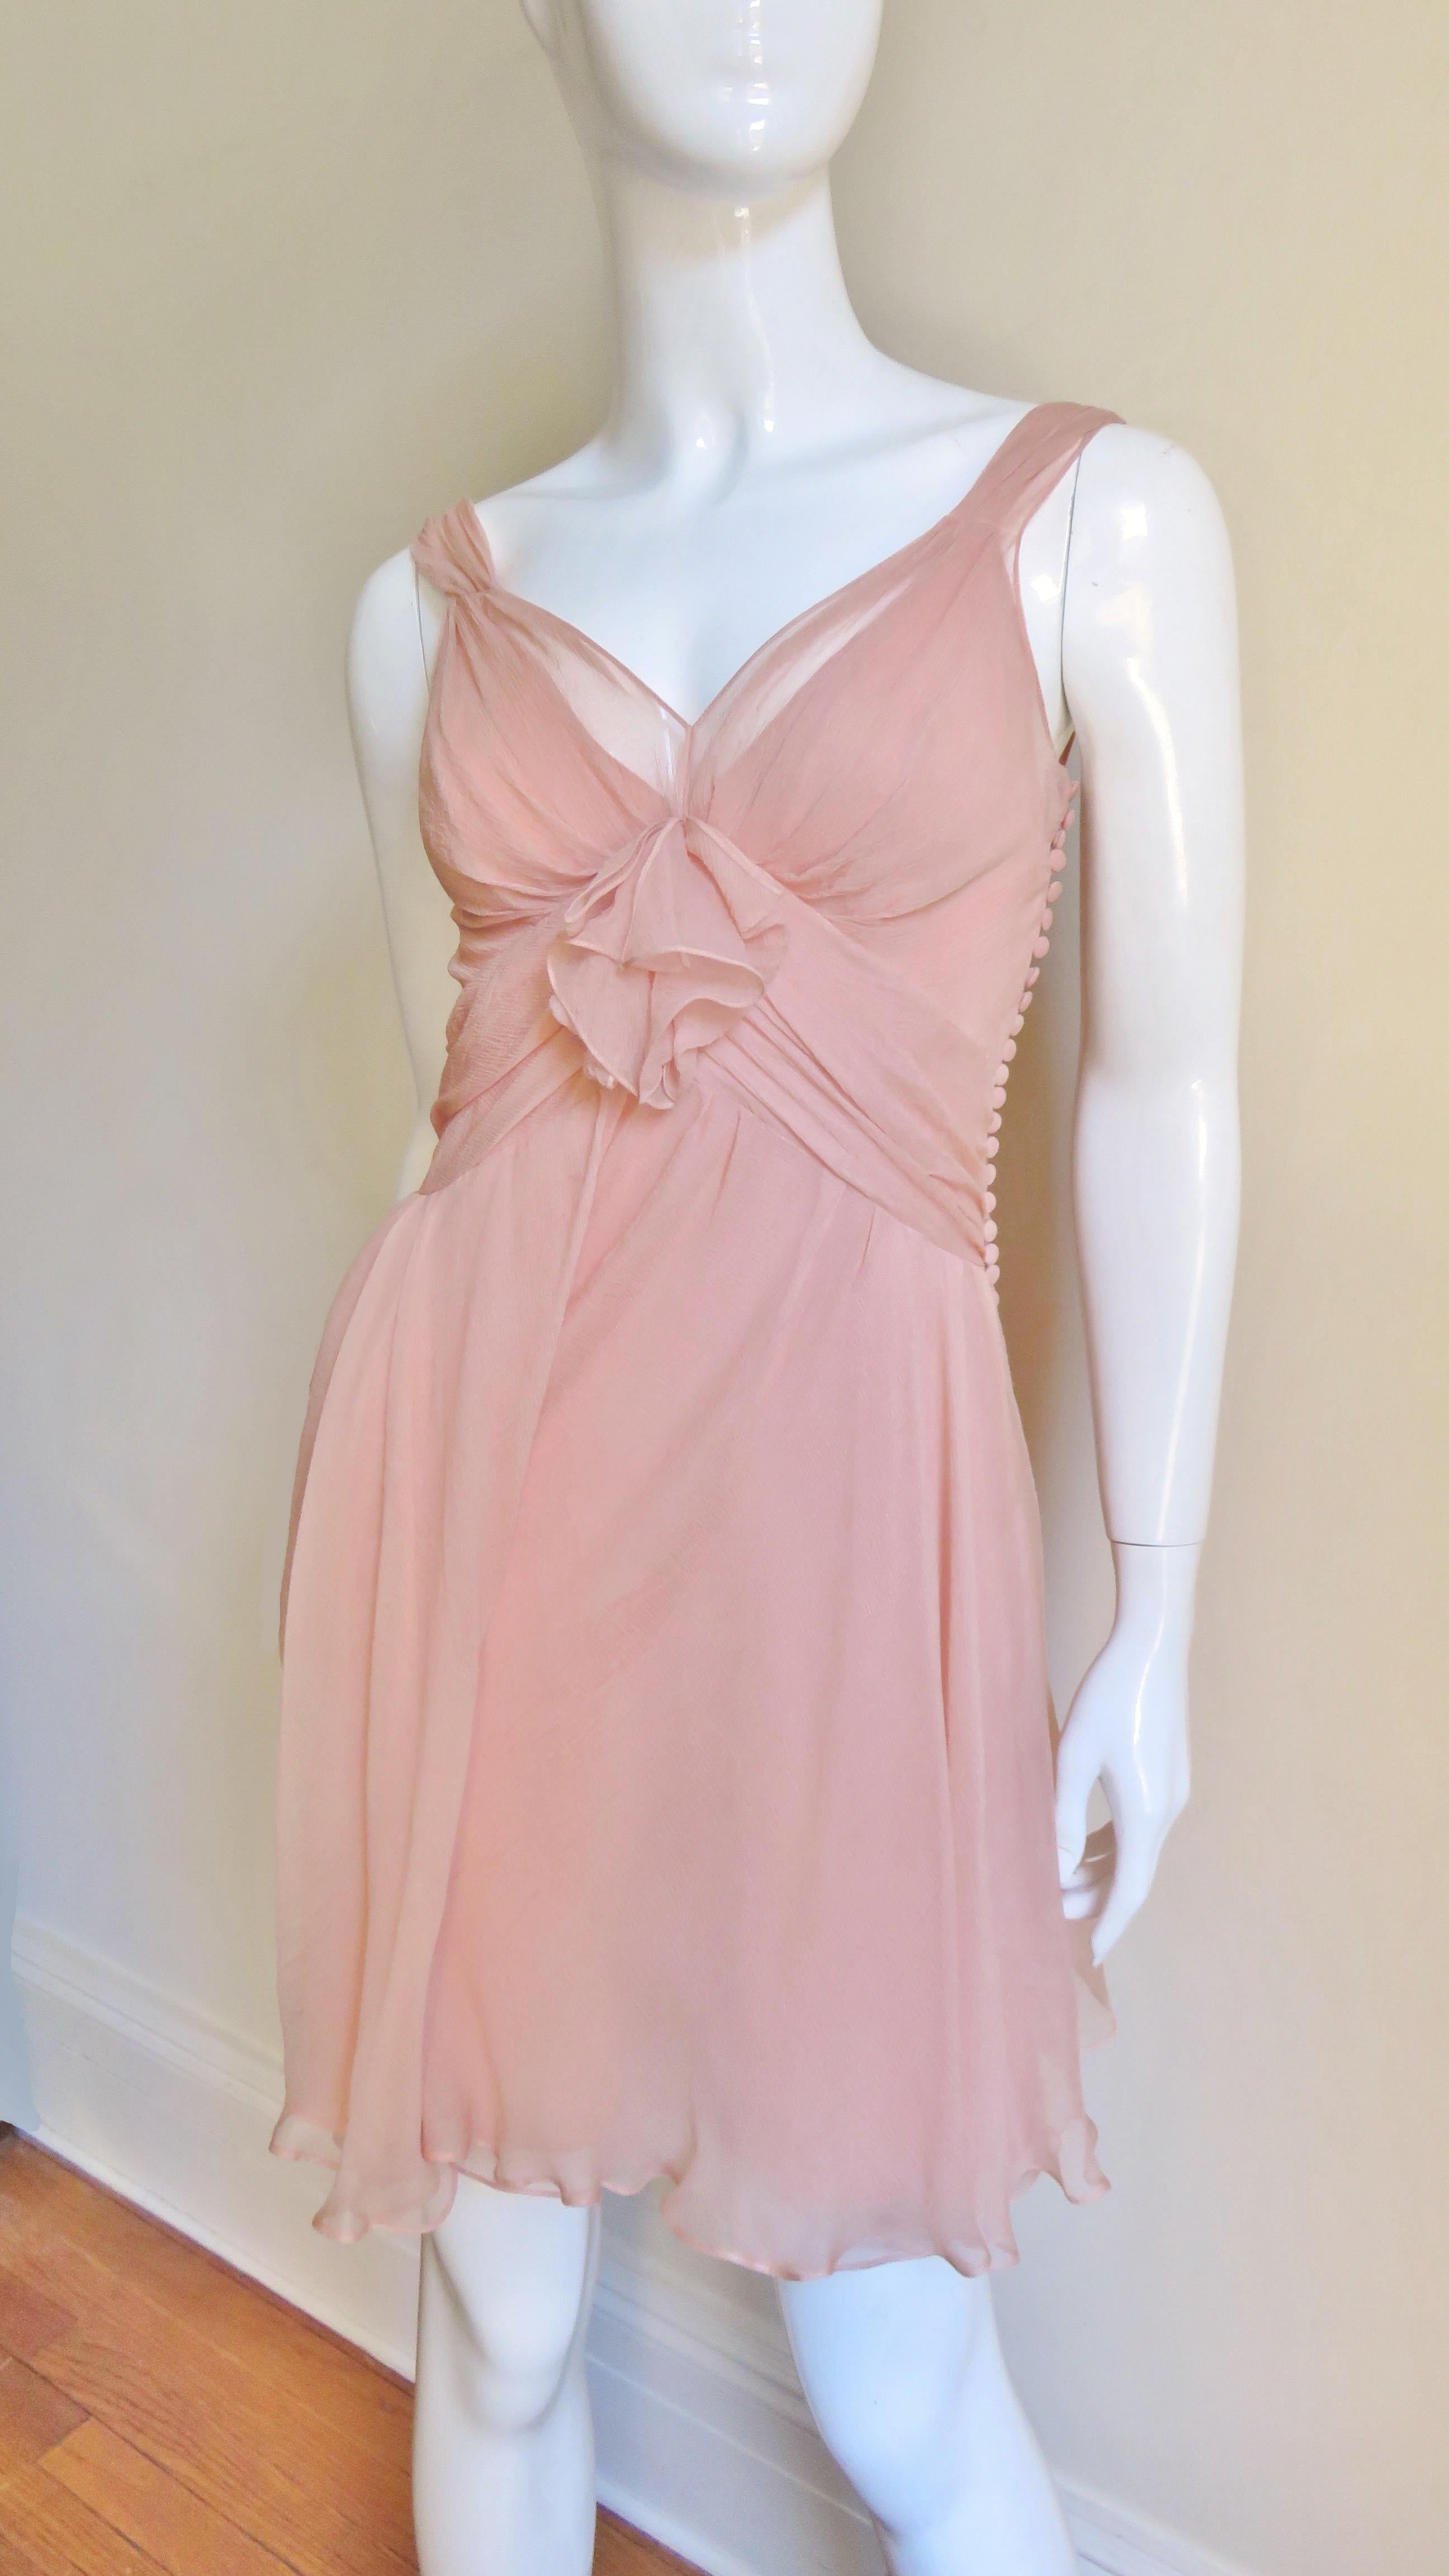 A gorgeous feminine peach silk dress from Christian Dior. It has ruched shoulder straps, bodice, and waist and a deep plunging back.  The full skirt has side draping and there are signature small silk covered buttons and loops along one side of the